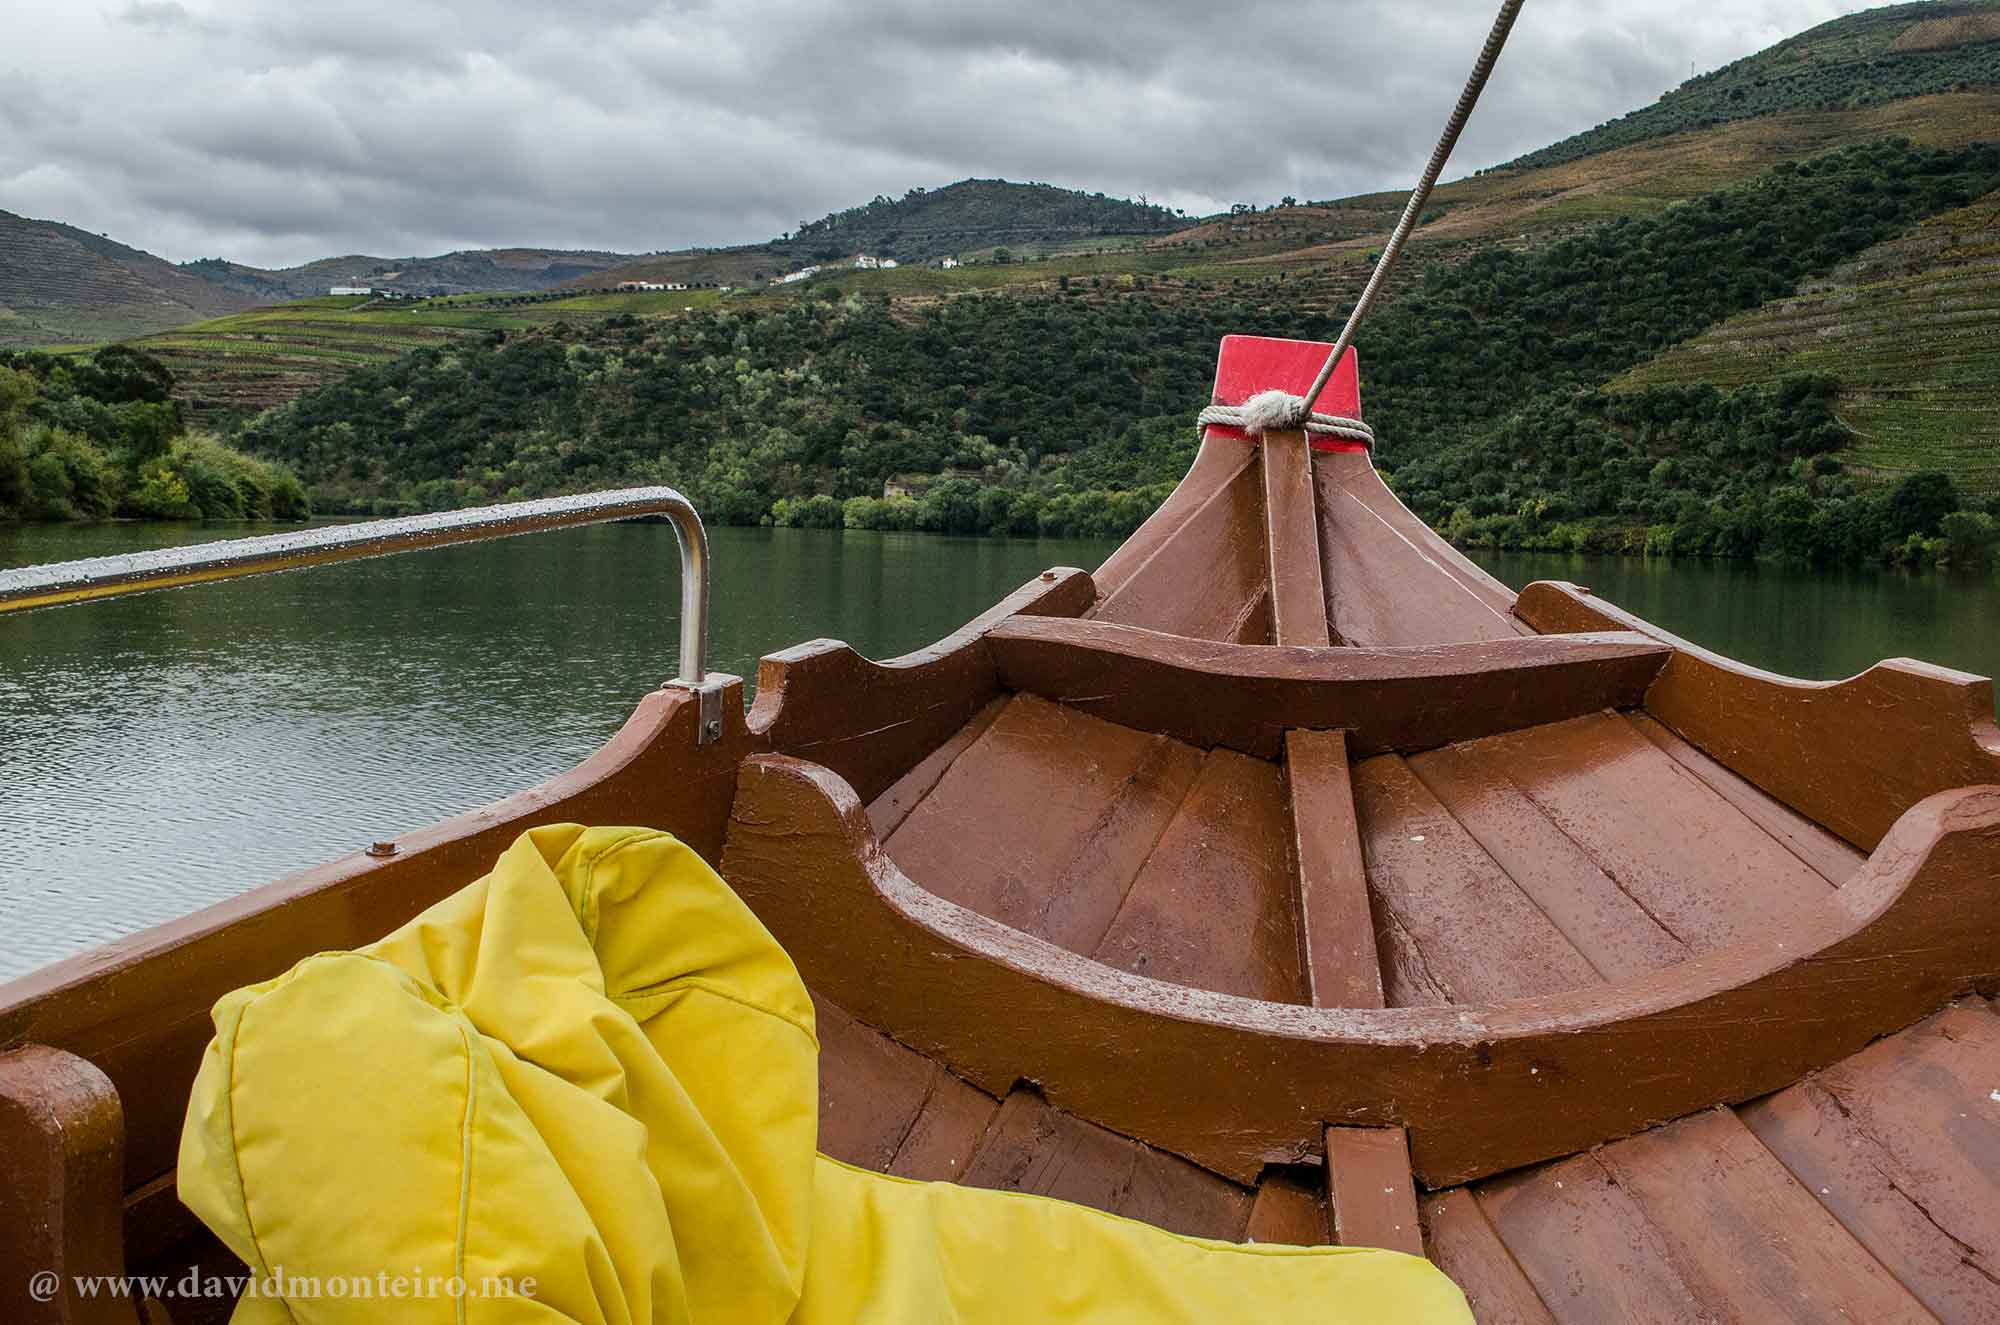 Rabelo boat. the Douro Valley's traditional wooden boat.